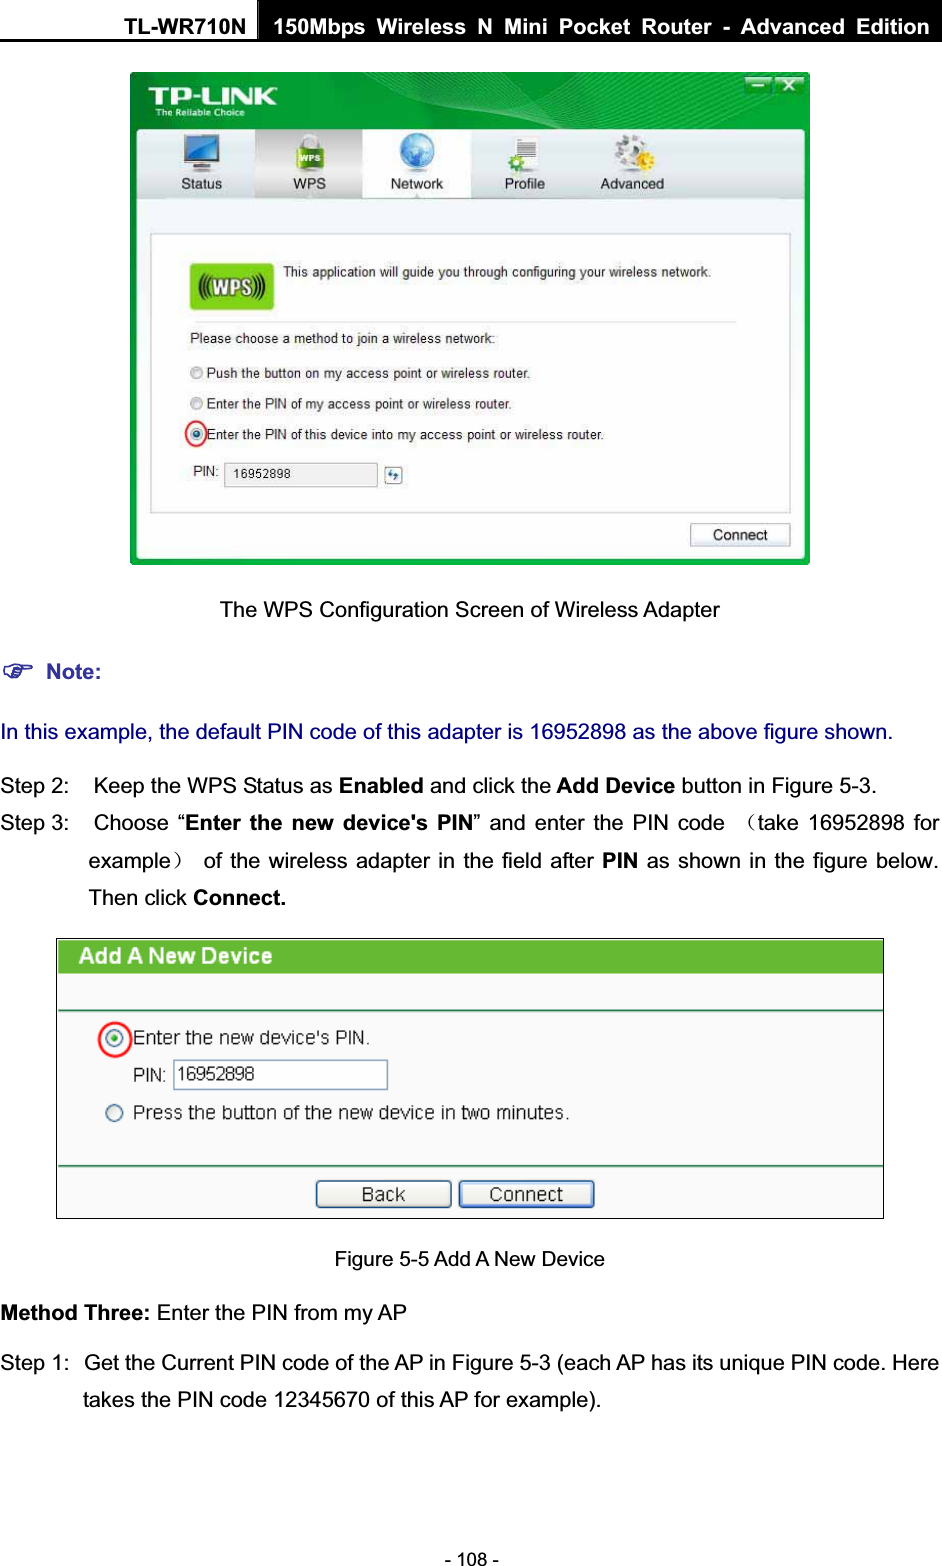 TL-WR710N  150Mbps Wireless N Mini Pocket Router - Advanced Edition- 108 - The WPS Configuration Screen of Wireless Adapter )Note:In this example, the default PIN code of this adapter is 16952898 as the above figure shown.Step 2:  Keep the WPS Status as Enabled and click the Add Device button in Figure 5-3. Step 3:  Choose “Enter the new device&apos;s PIN” and enter the PIN code ˄take 16952898 for example˅  of the wireless adapter in the field after PIN as shown in the figure below. Then click Connect.Figure 5-5 Add A New DeviceMethod Three: Enter the PIN from my AP Step 1:  Get the Current PIN code of the AP in Figure 5-3 (each AP has its unique PIN code. Here takes the PIN code 12345670 of this AP for example). 